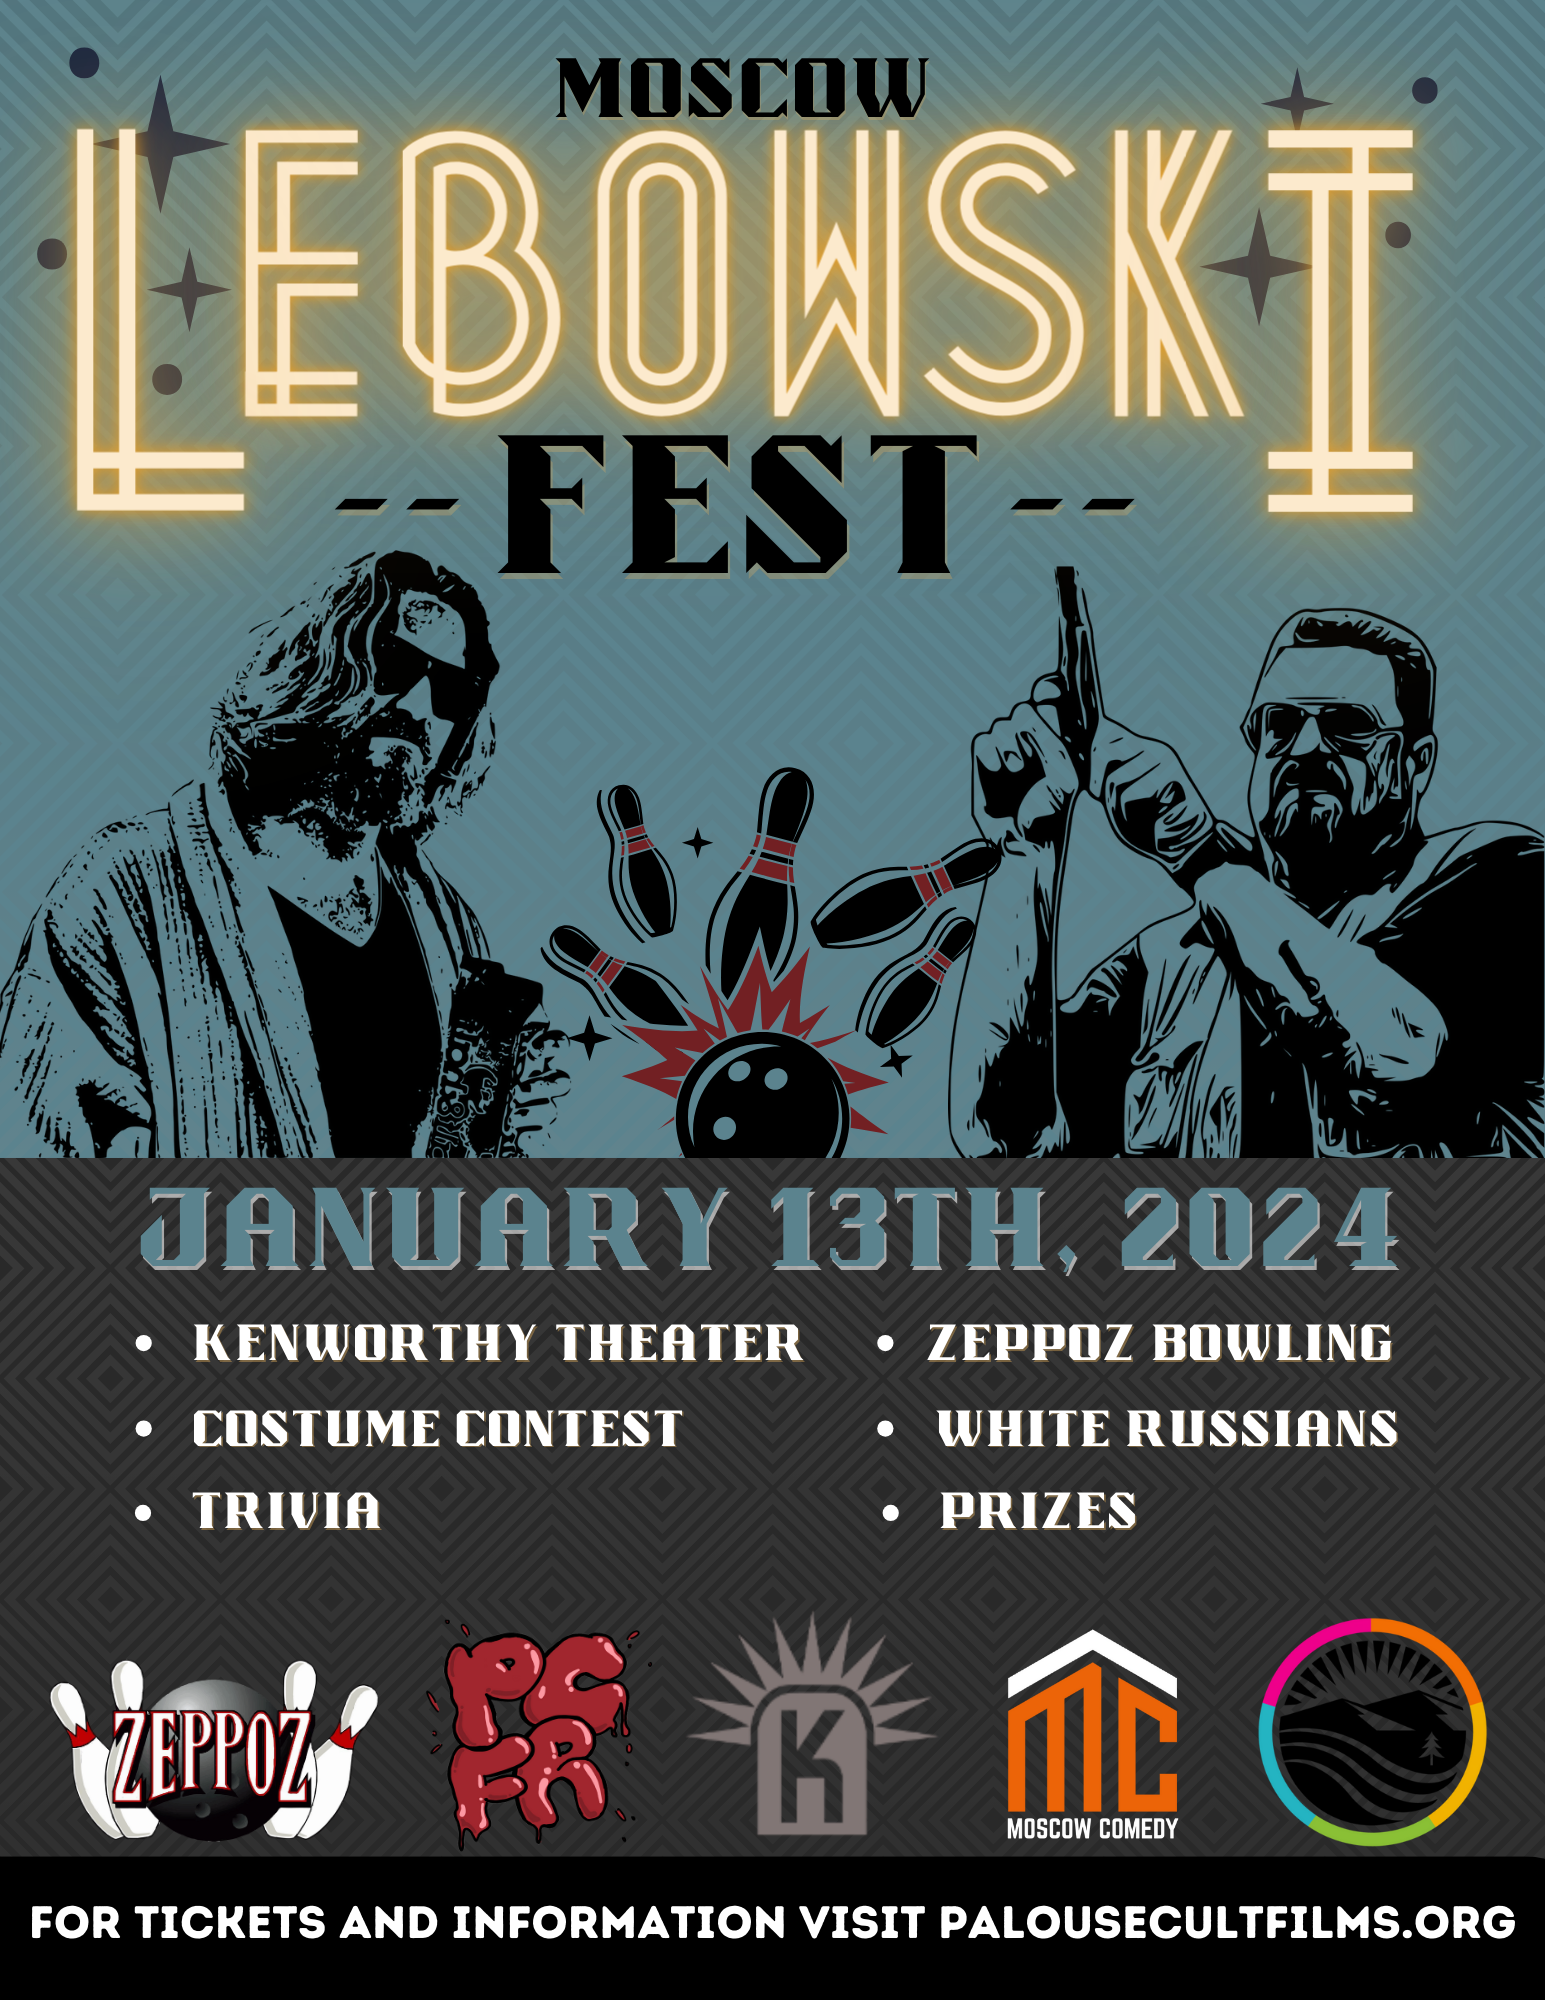 Moscow Lebowski Fest Moscow Idaho Chamber of Commerce